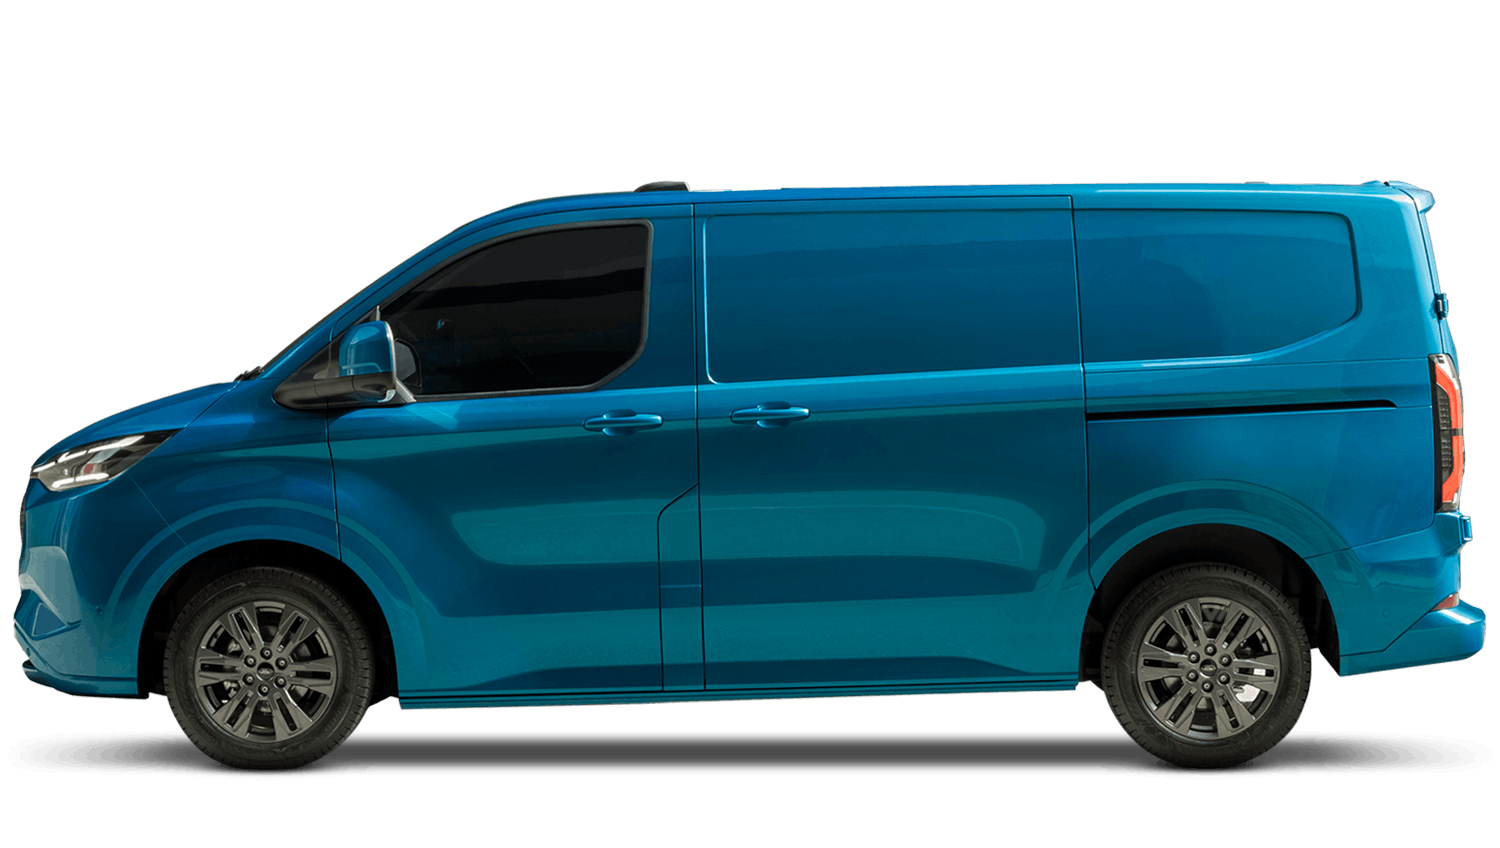 The Ford Transit Custom Like You've Never Seen It Before